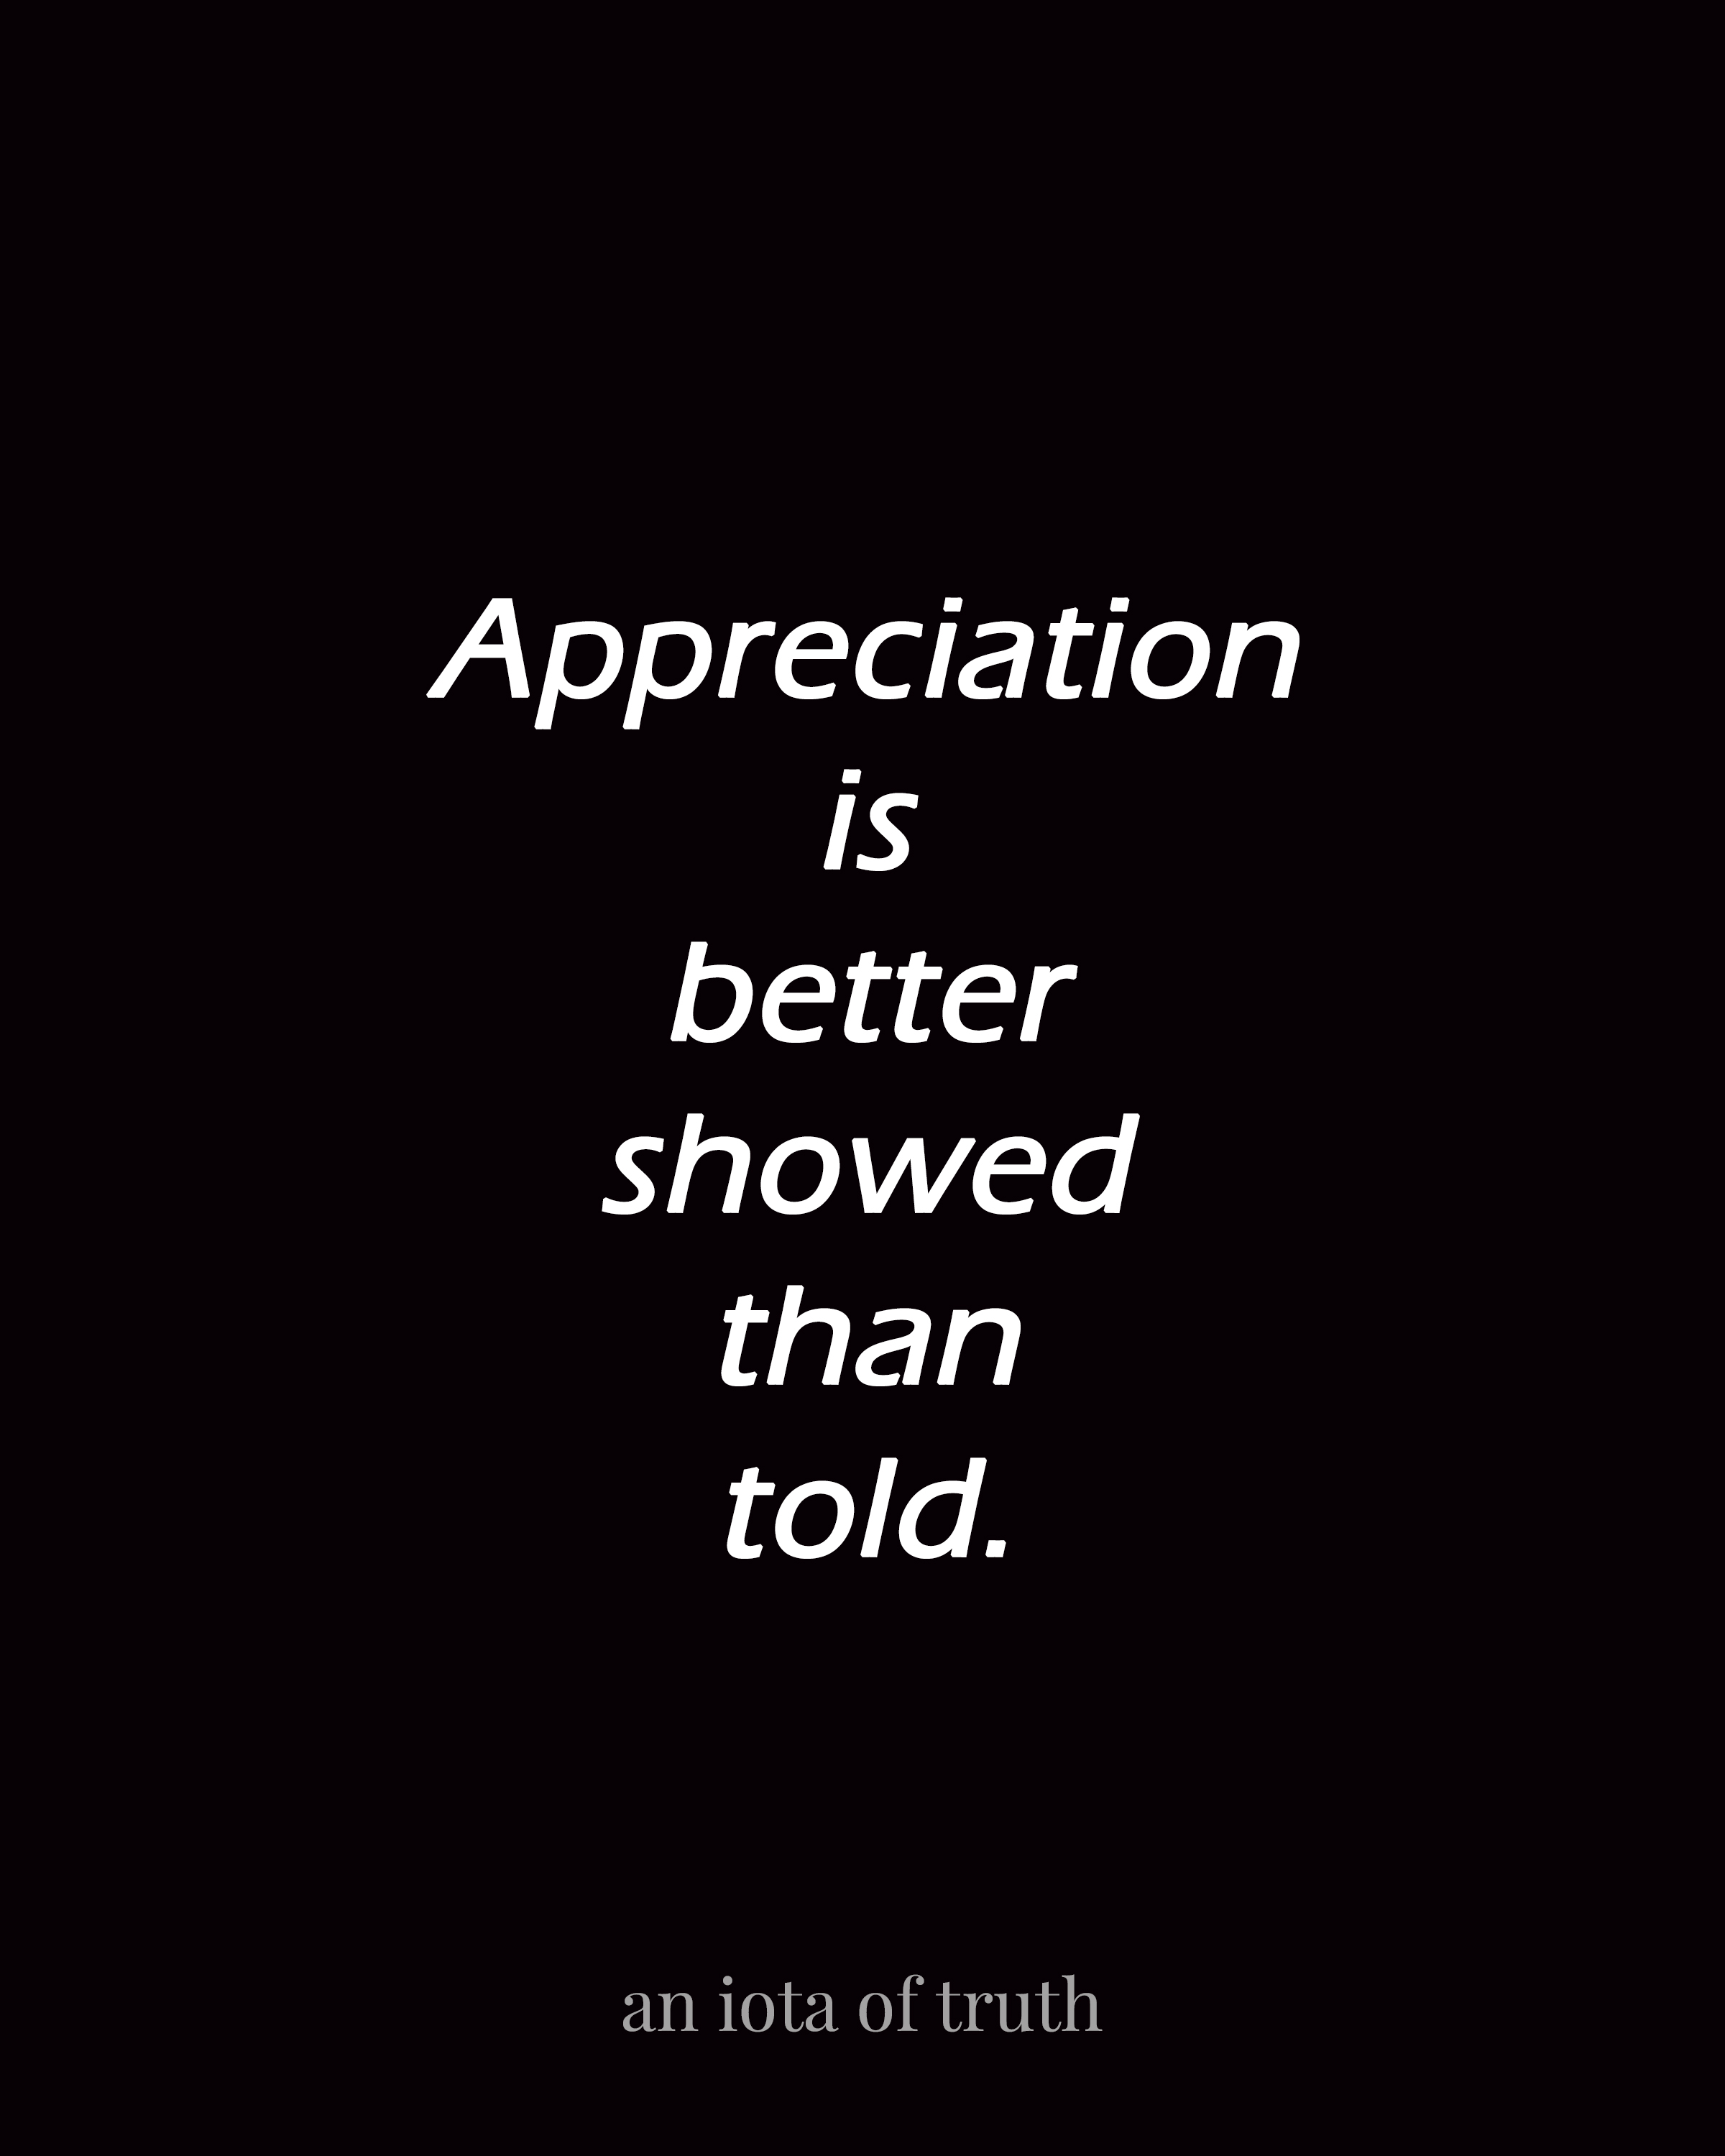 Appreciation is better showed than told.